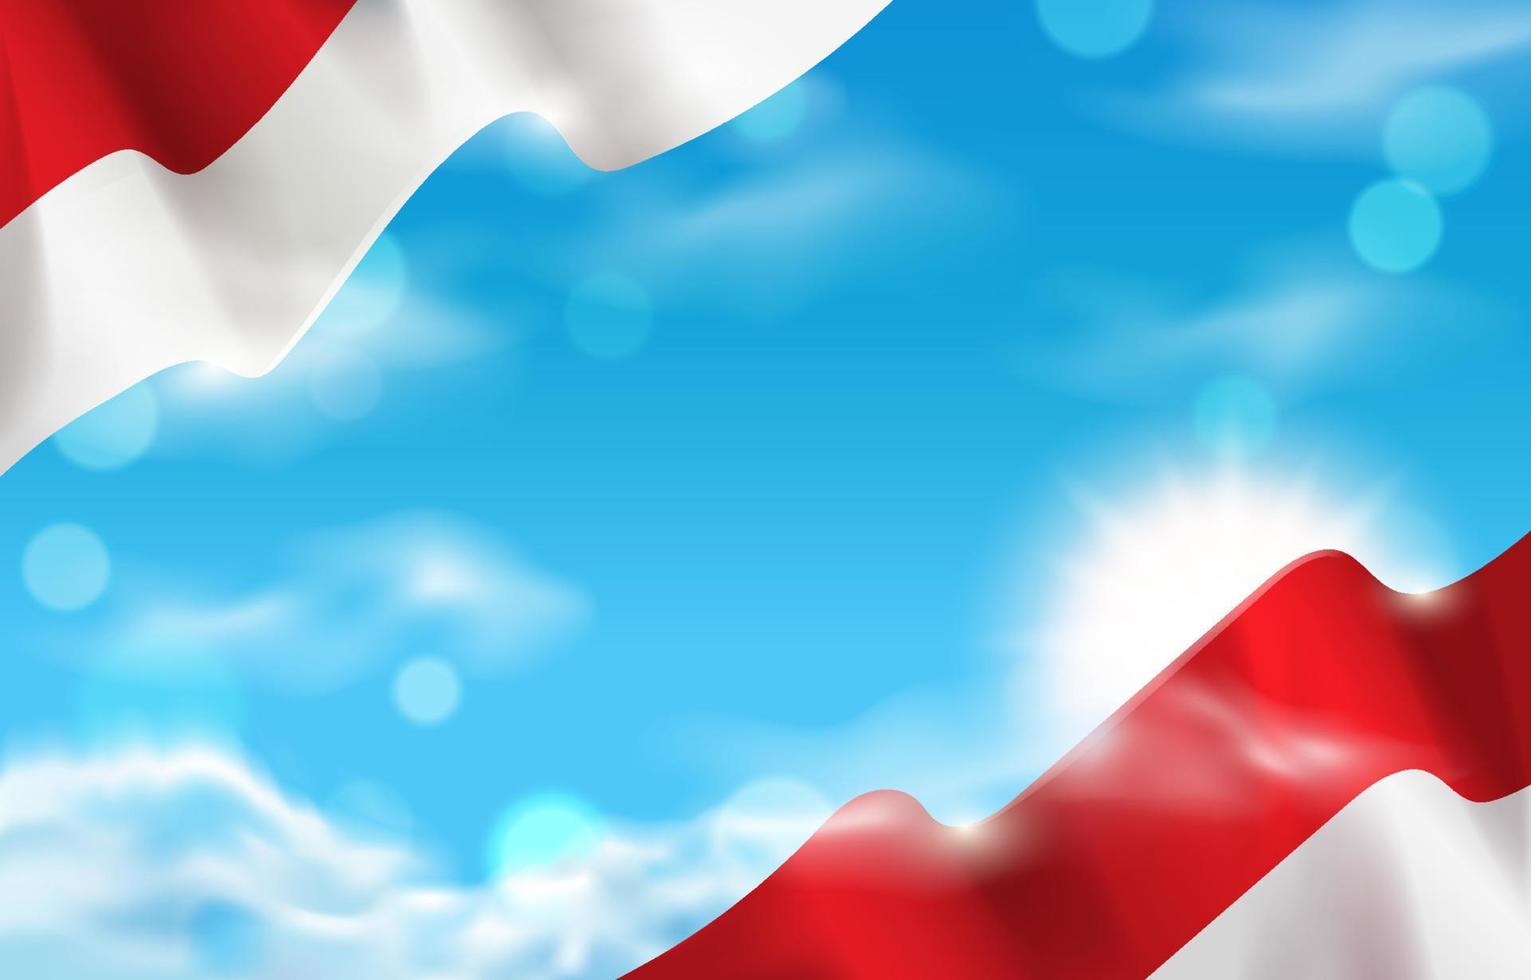 Indonesia Independence Day Background vector